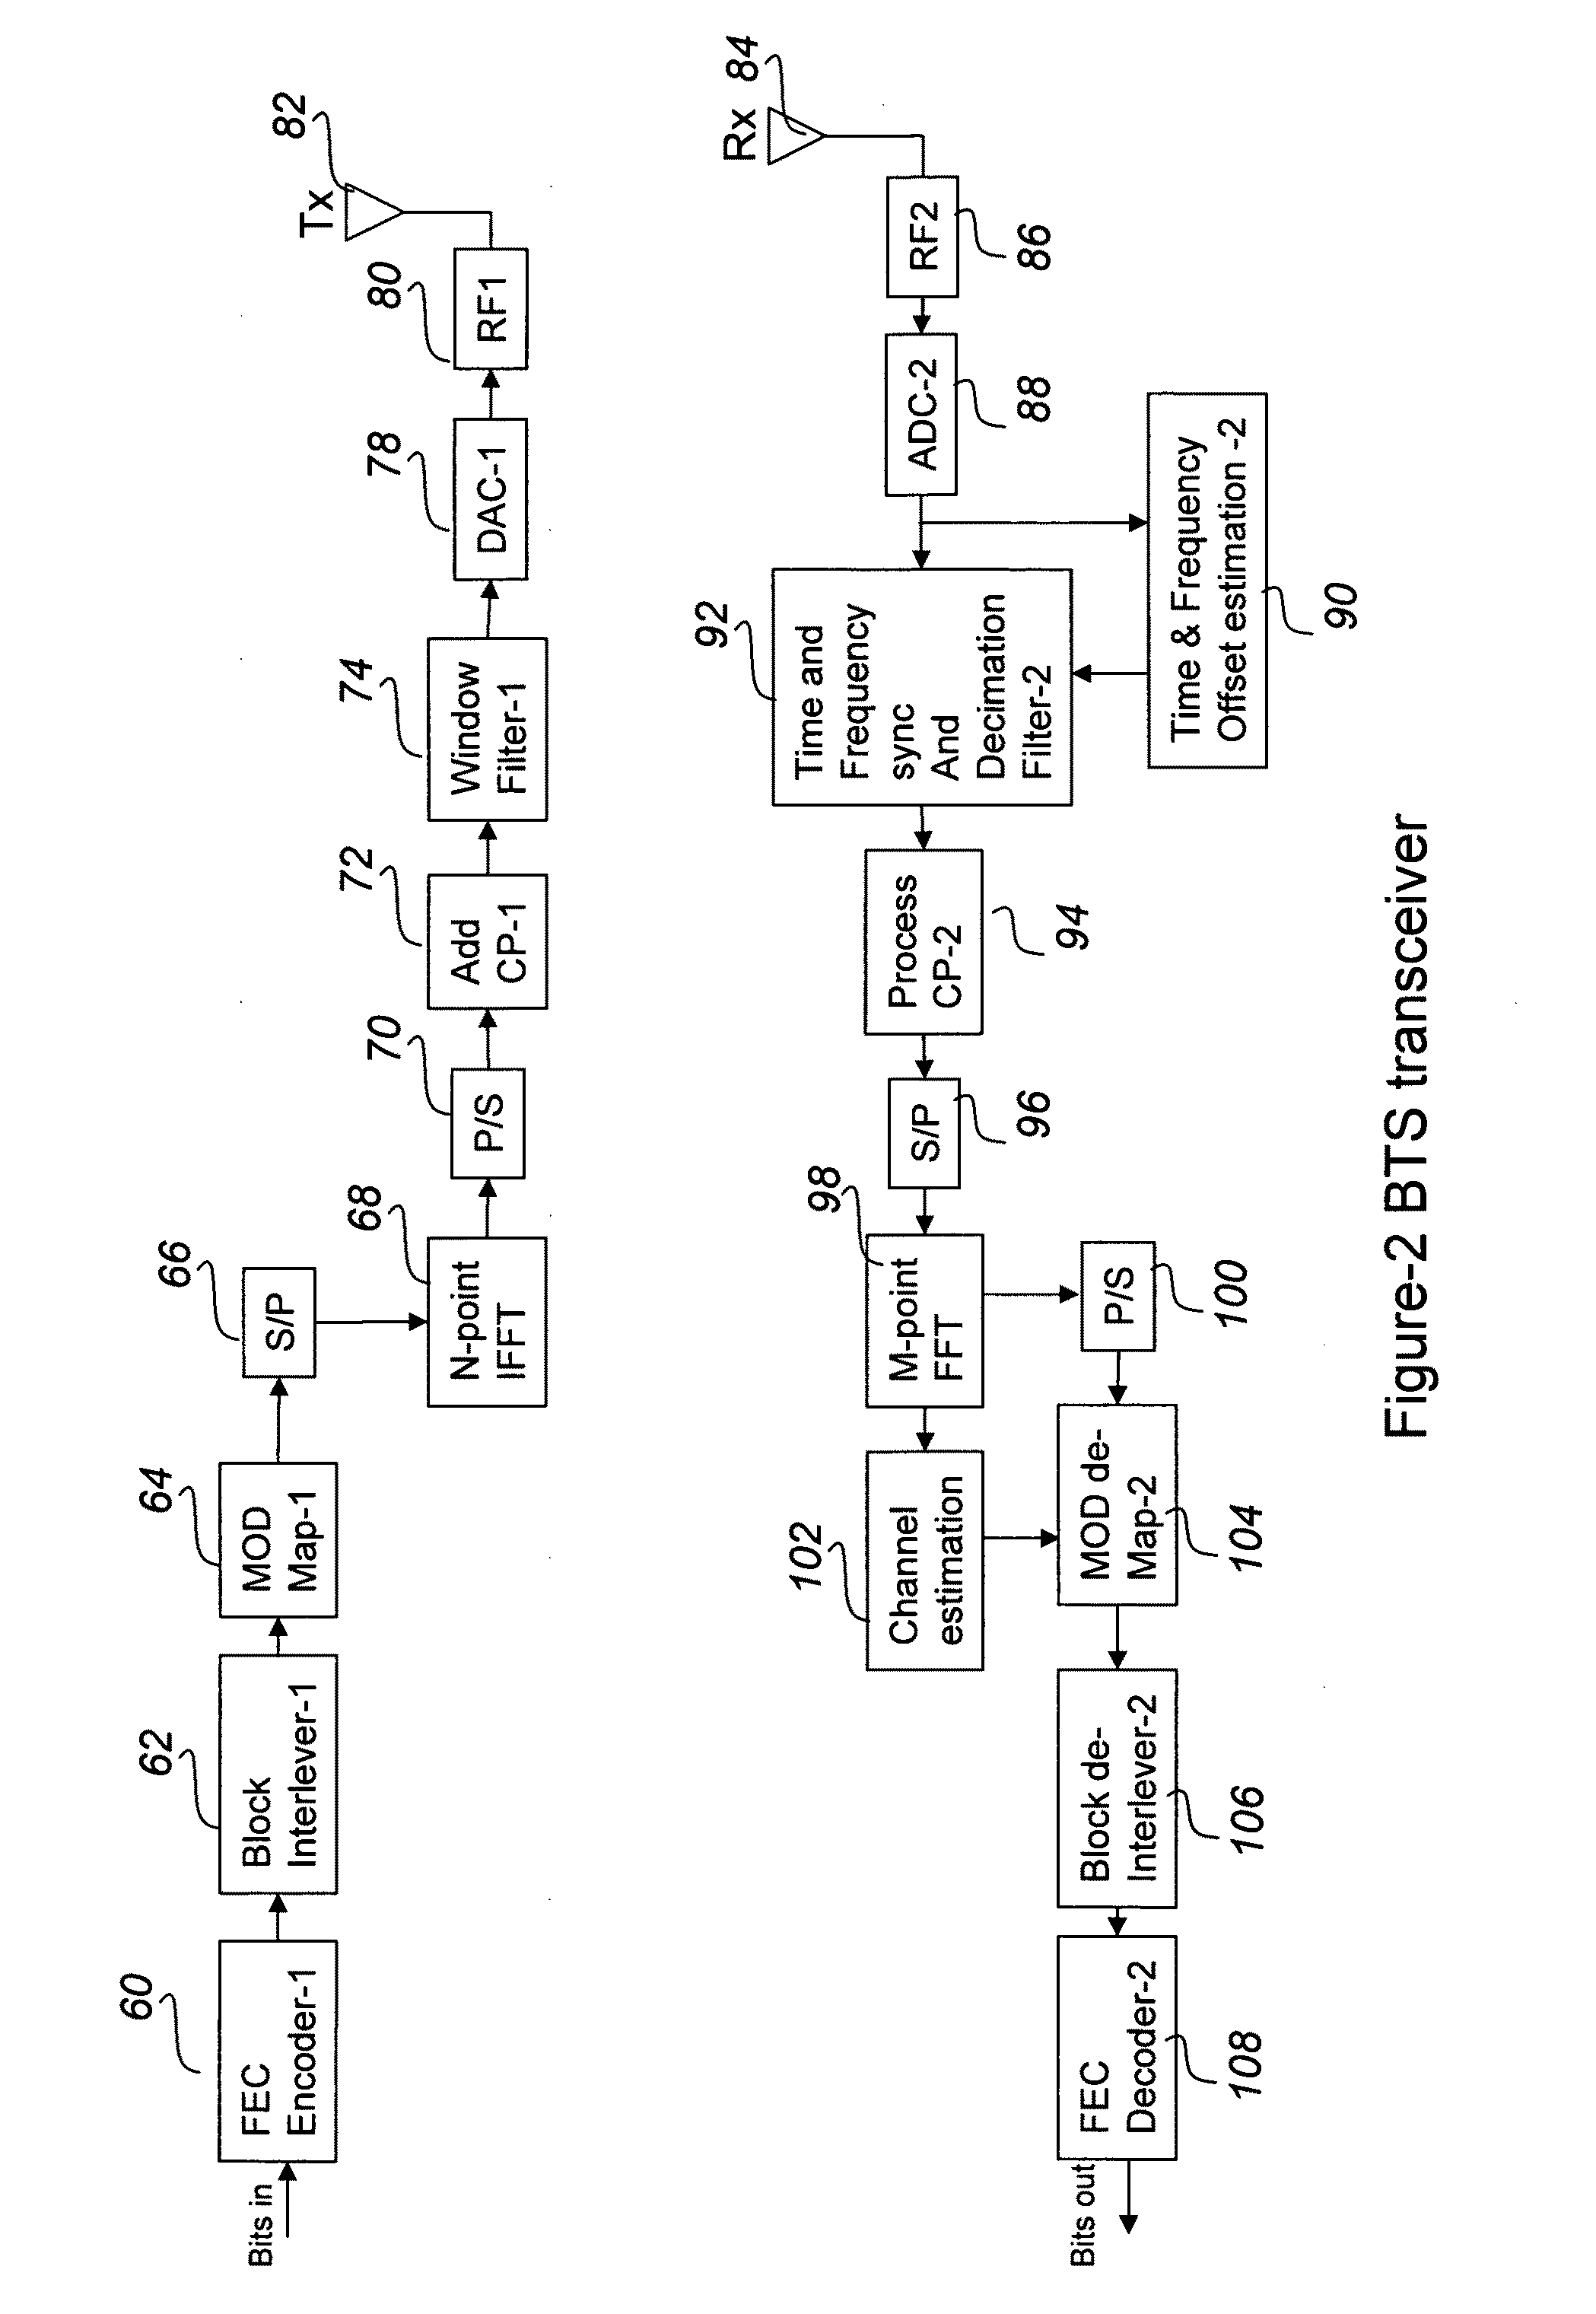 Systems and methods with non symmetric OFDM modulation